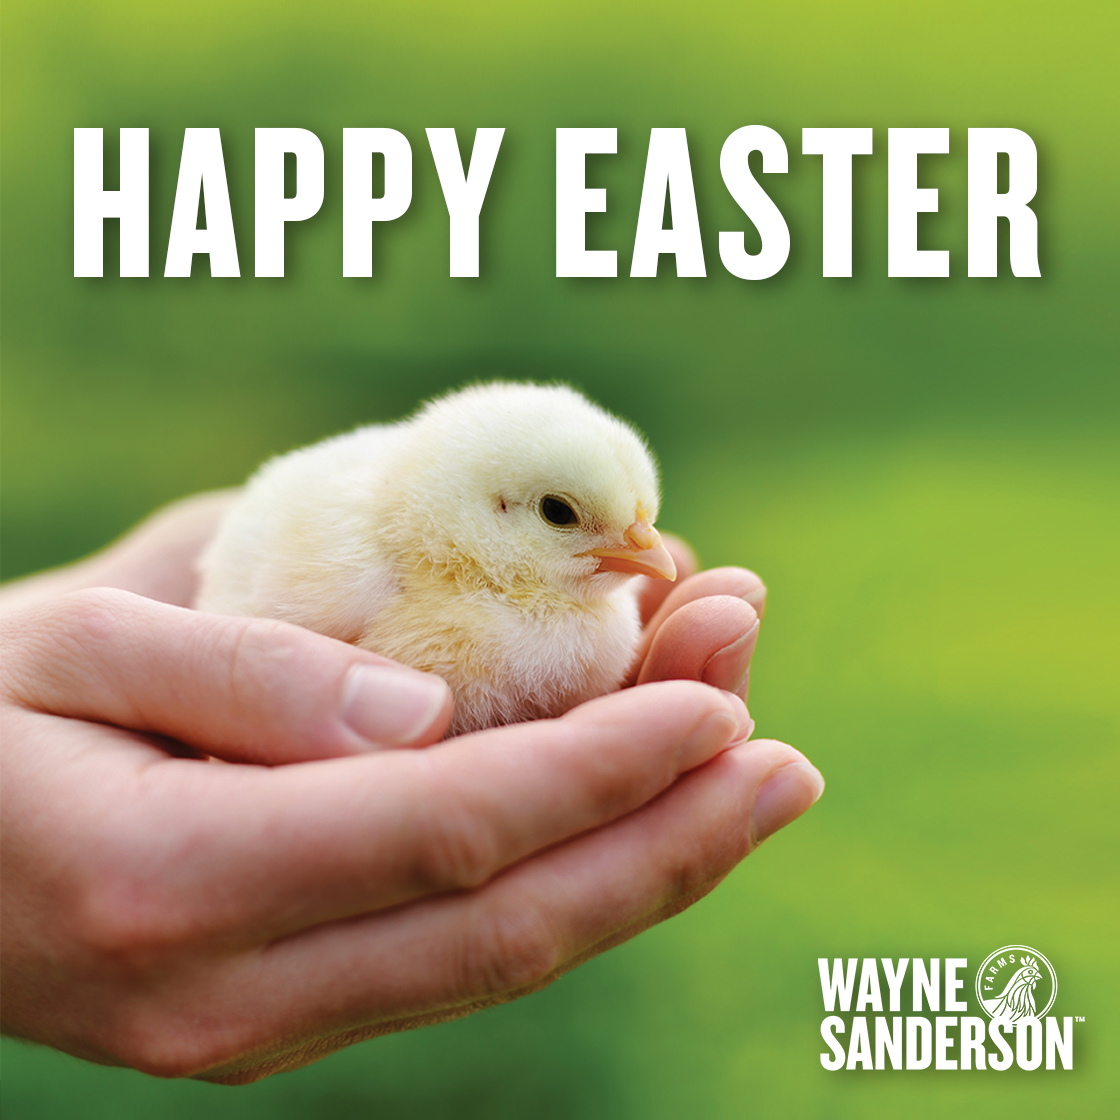 Happy Easter from Wayne-Sanderson Farms! Wishing you a joyful day spent with family and friends. #Easter2024